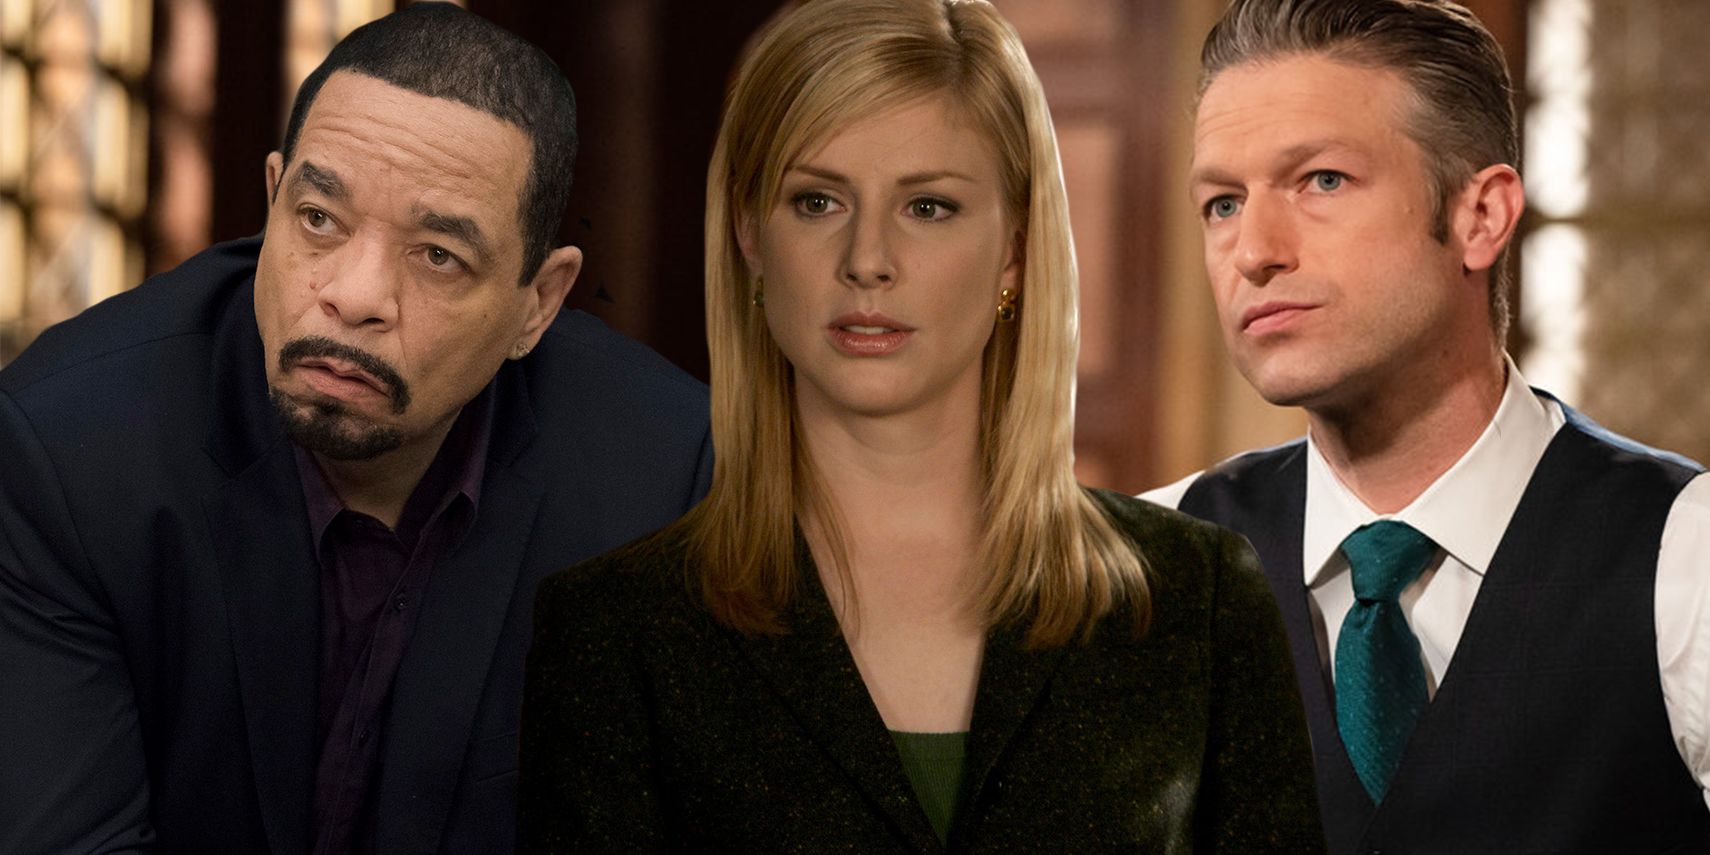 Ice-T, Neal and Scanavino in Law & Order franchise